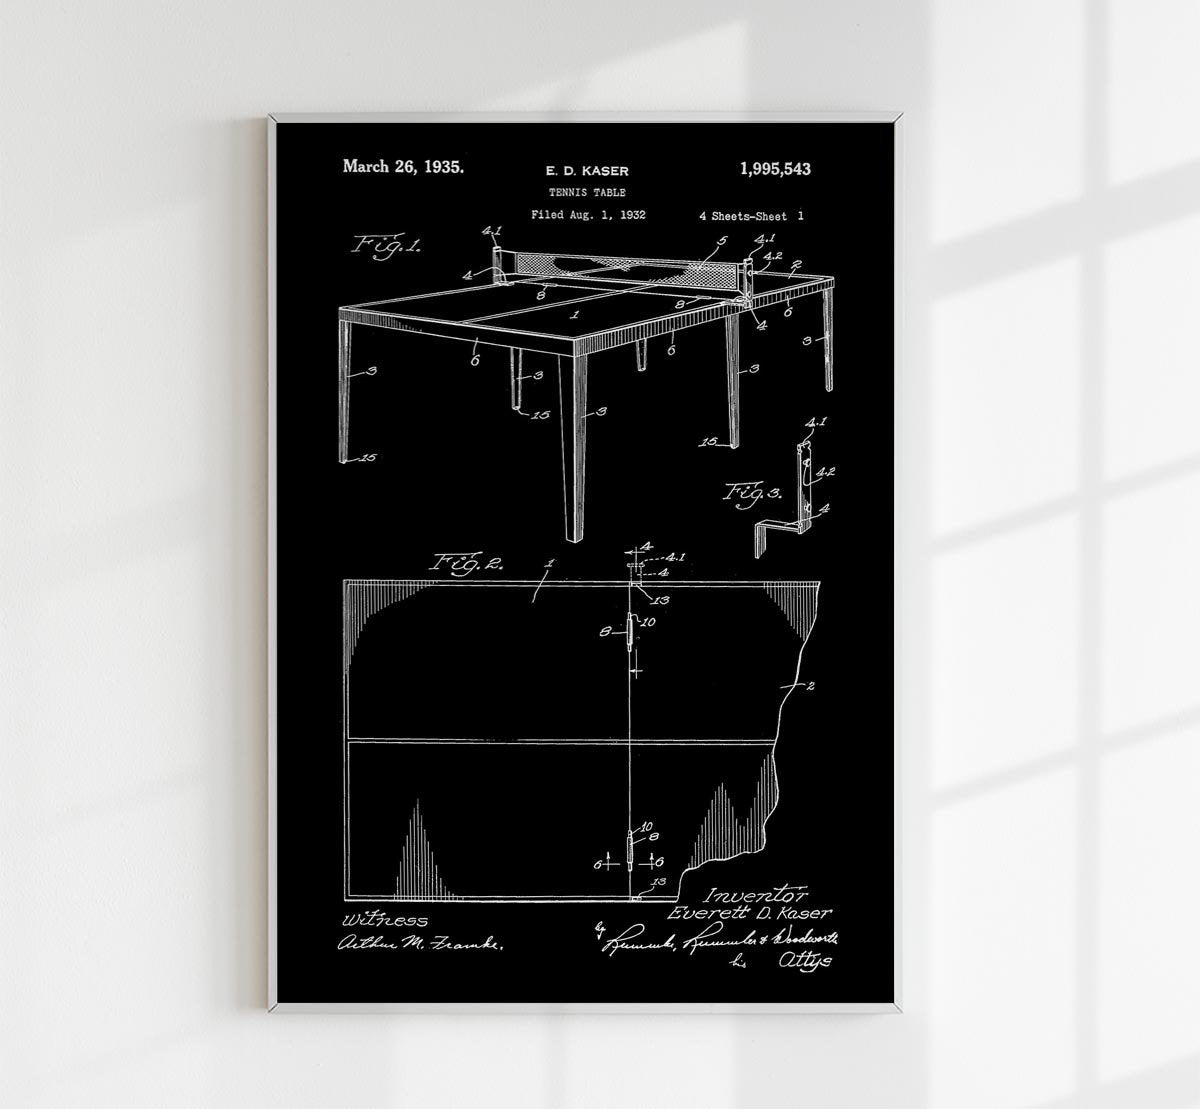 Tennis Table Patent Poster